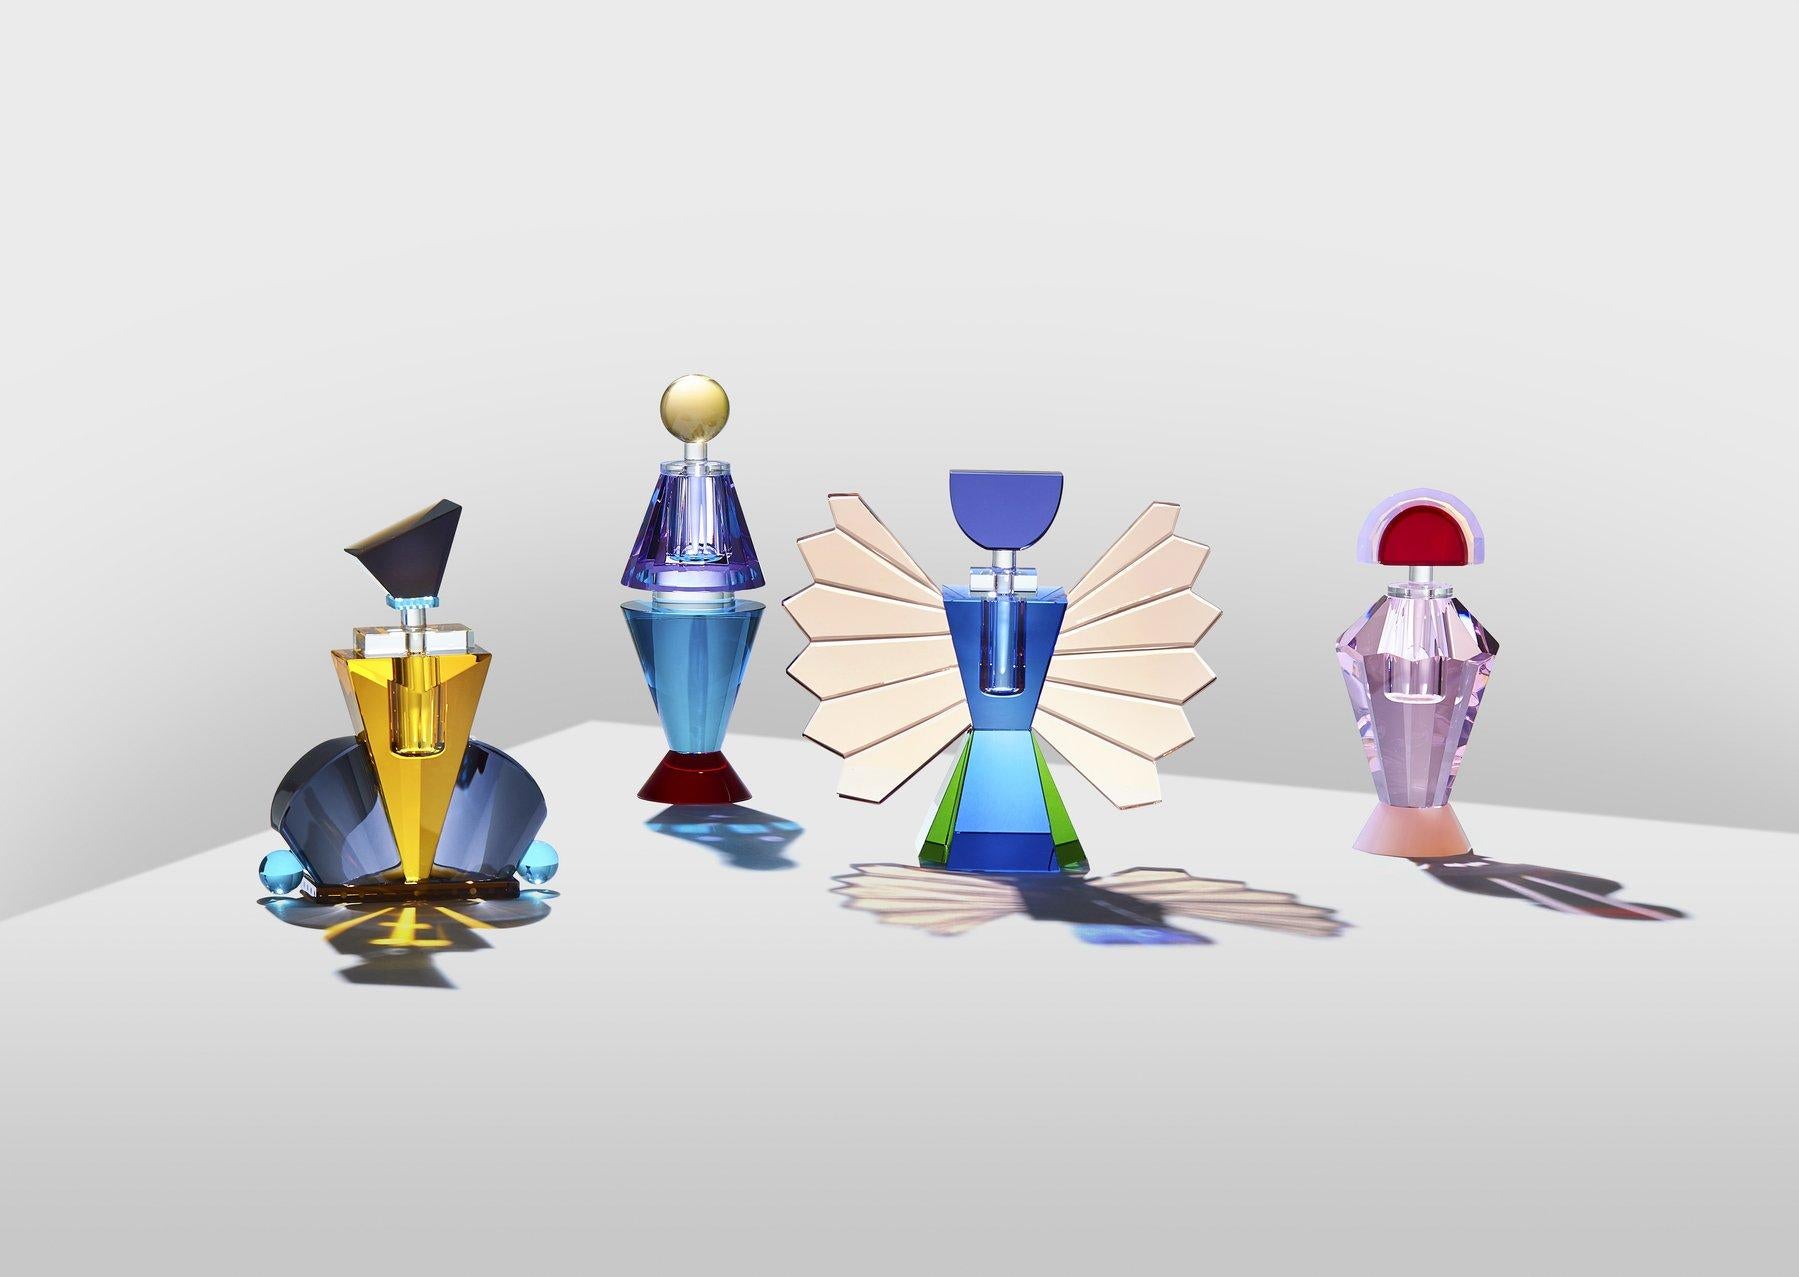 Set of 4 colorful crystal perfume flacons, hand-sculpted contemporary crystal.
Hand-sculpted in crystal
Measures: Small:
Height 17.5 cm
Width 20 cm
Depth 7.5 cm
Weight: 1.2 kg
Material: Fine handcut crystal.

The collection has 4 fine